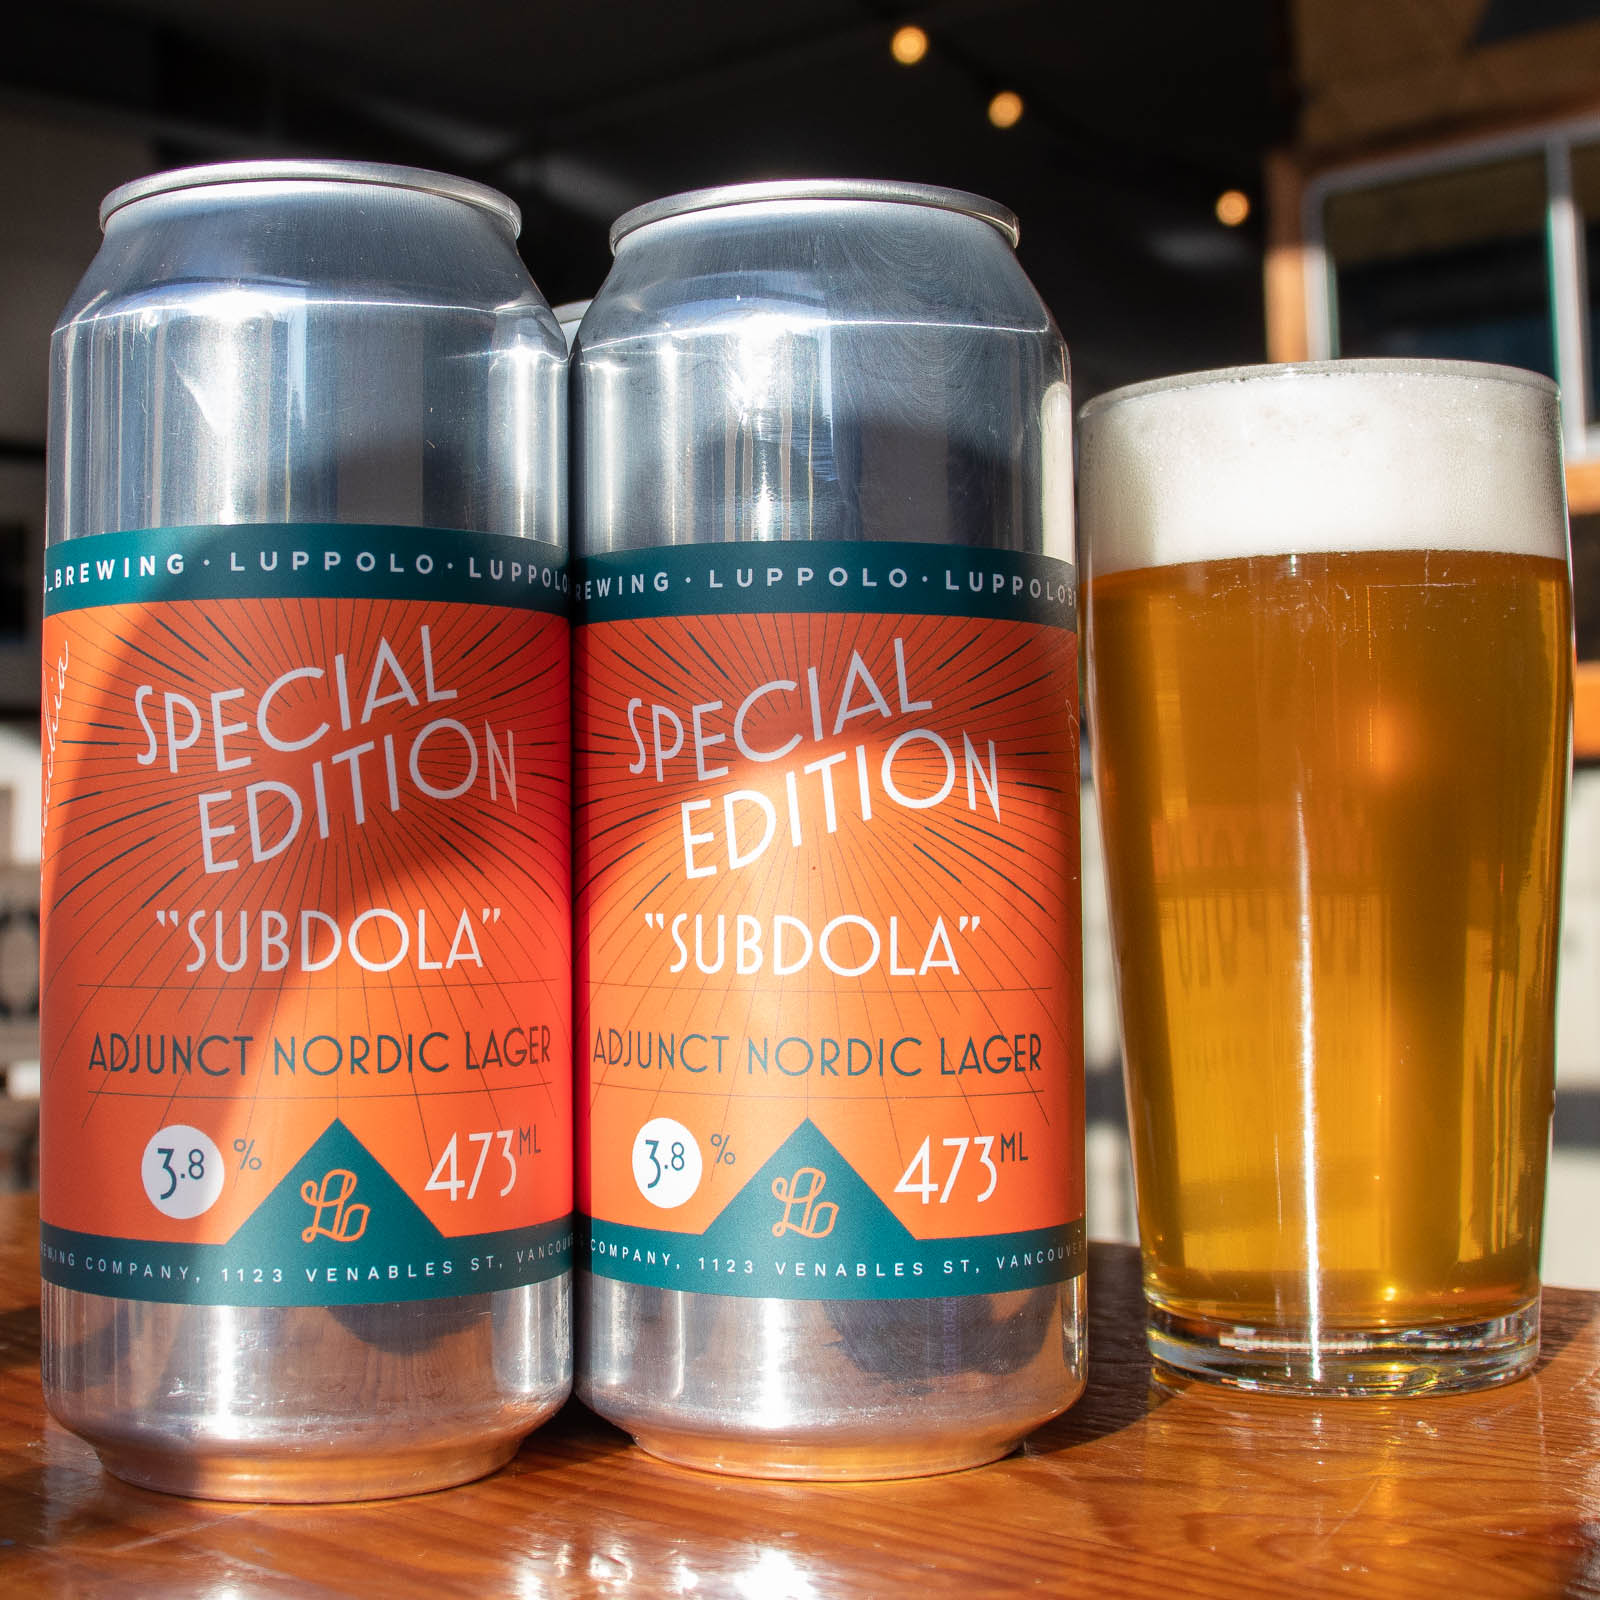 Subdola-Nordic-Lager-Luppolo-Brewing-Company